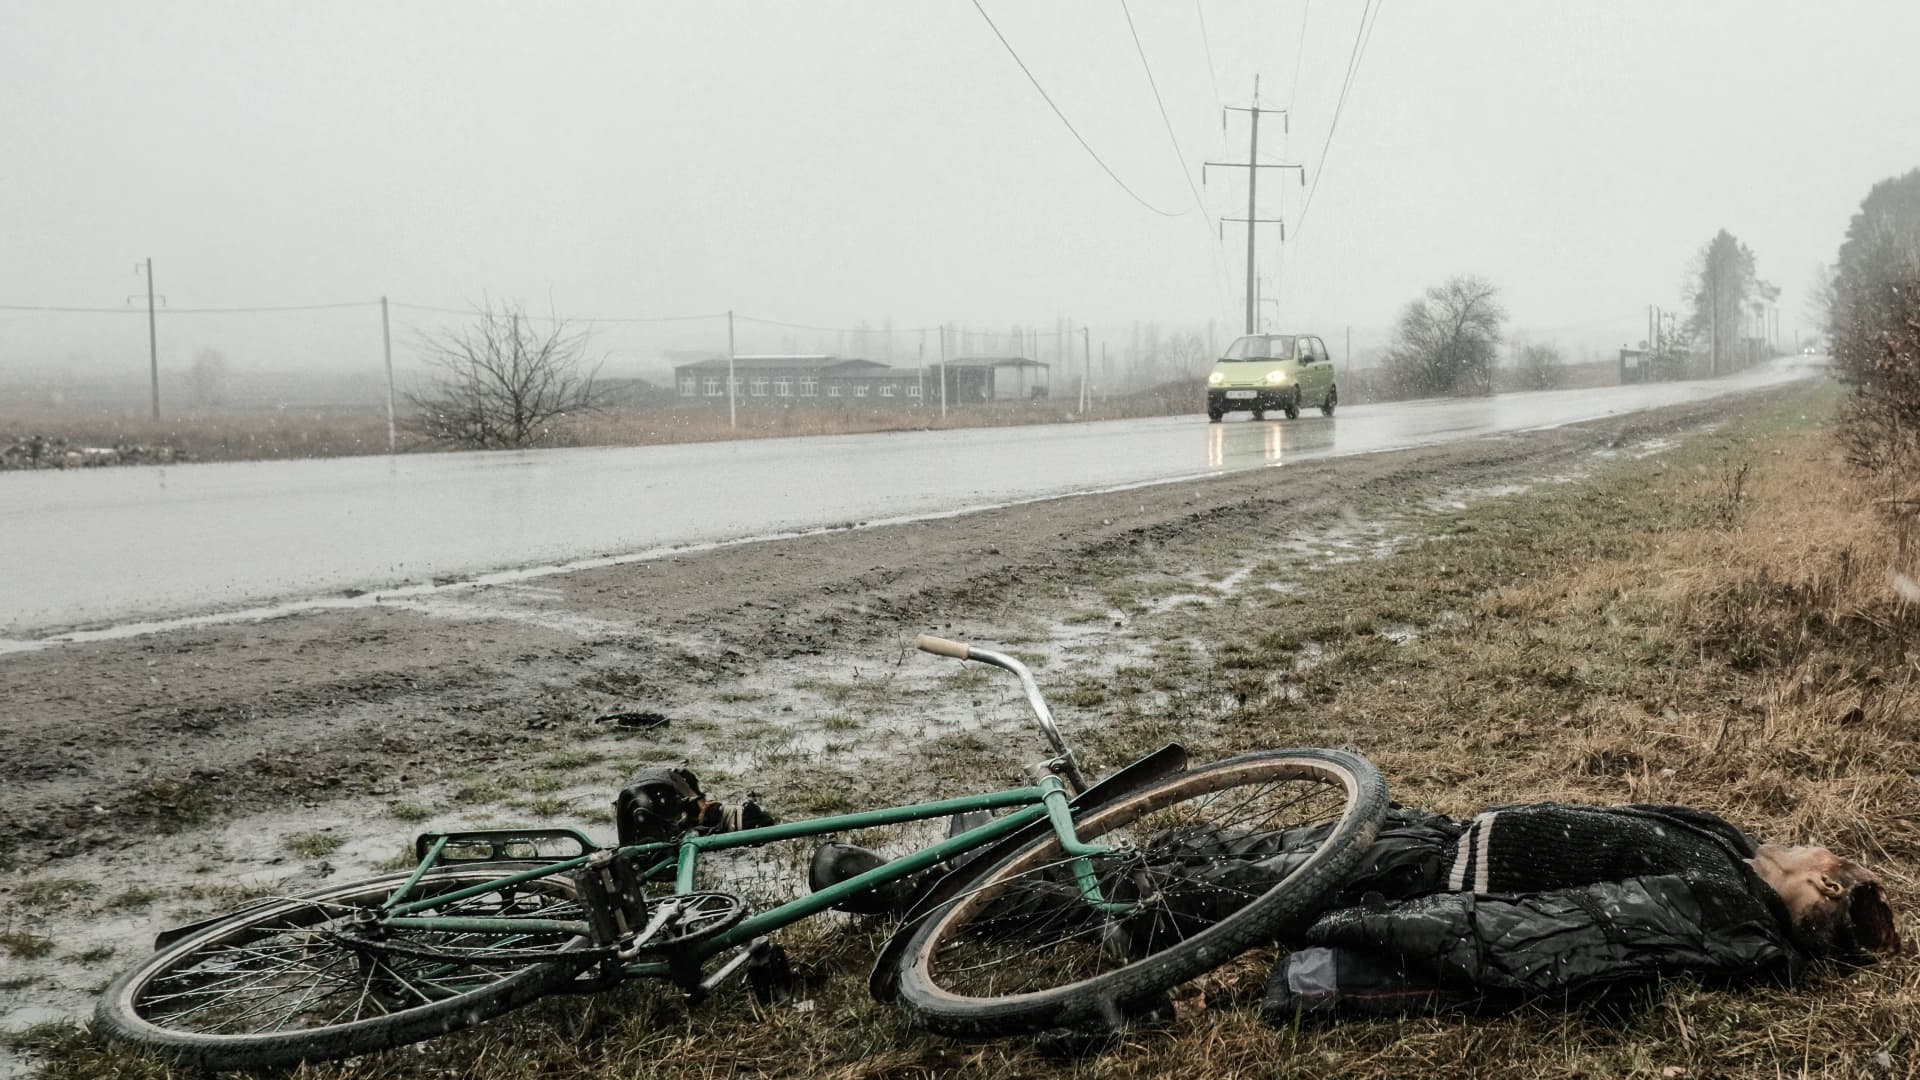 A dead body lays strewn on the ground next to a bicycle on the outskirts of Bucha, Ukraine. Scores of civilians are thought to have been killed by Russian troops while trying to flee the city to the northwest of Kyiv.